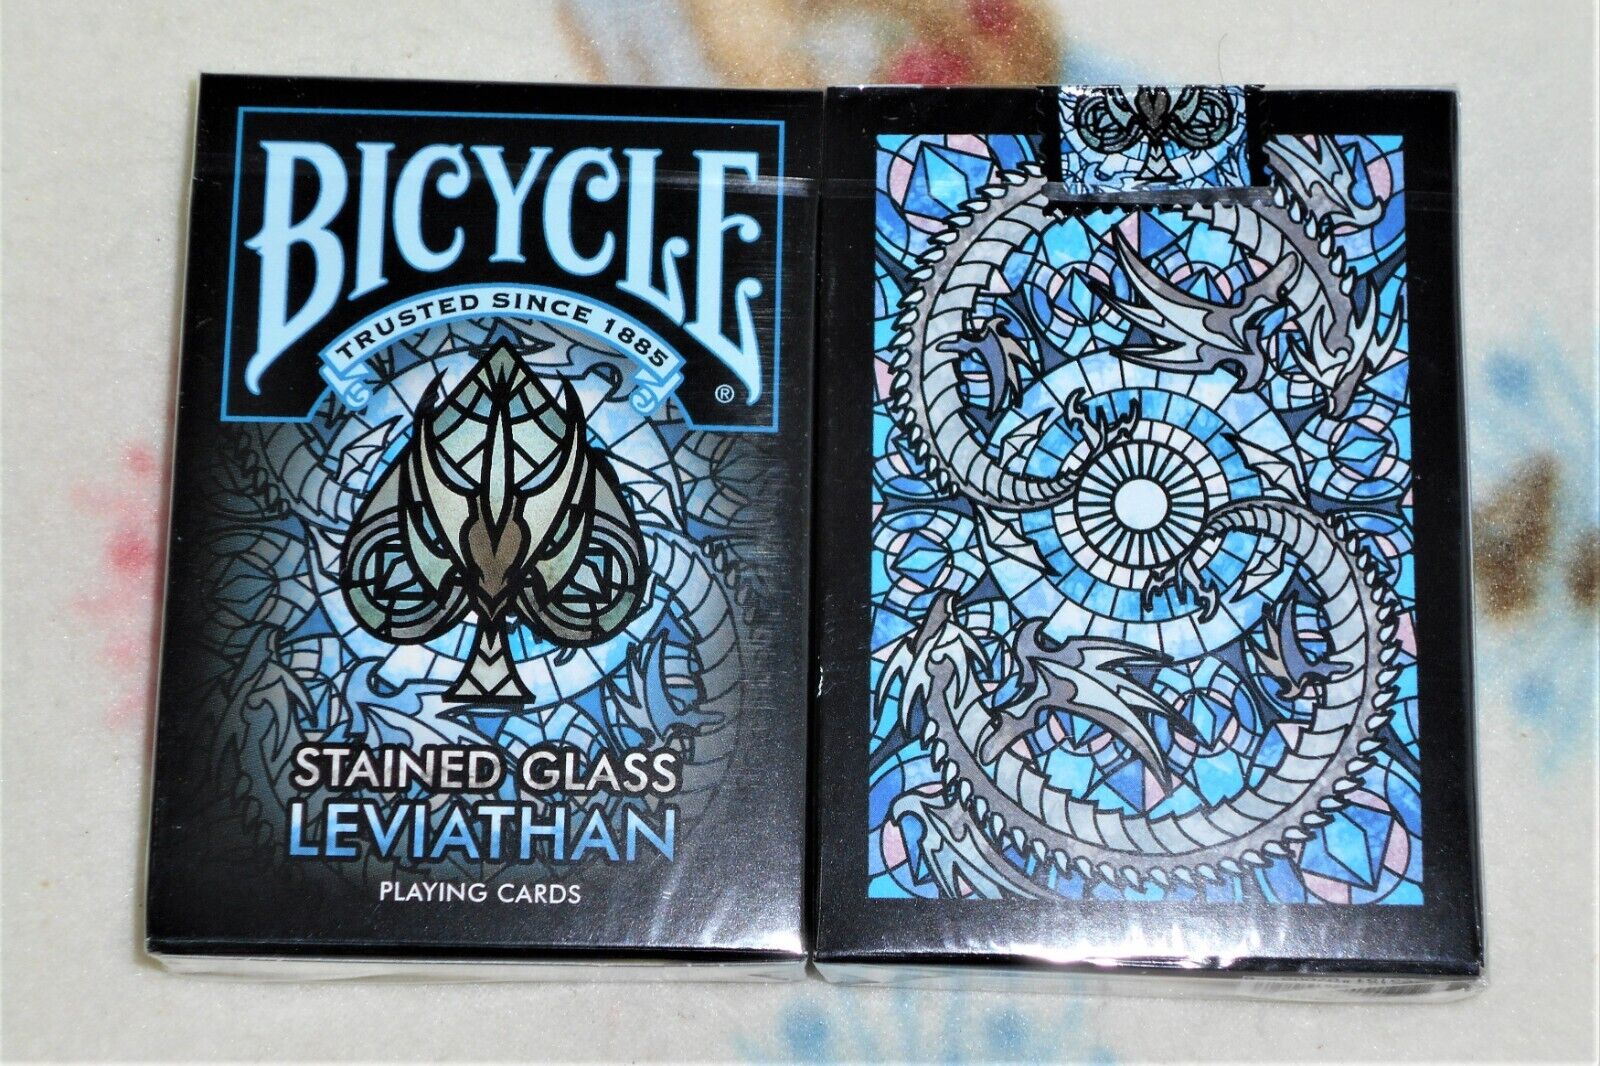 1 deck Bicycle Stained Glass Leviathan Playing Cards-S103049643